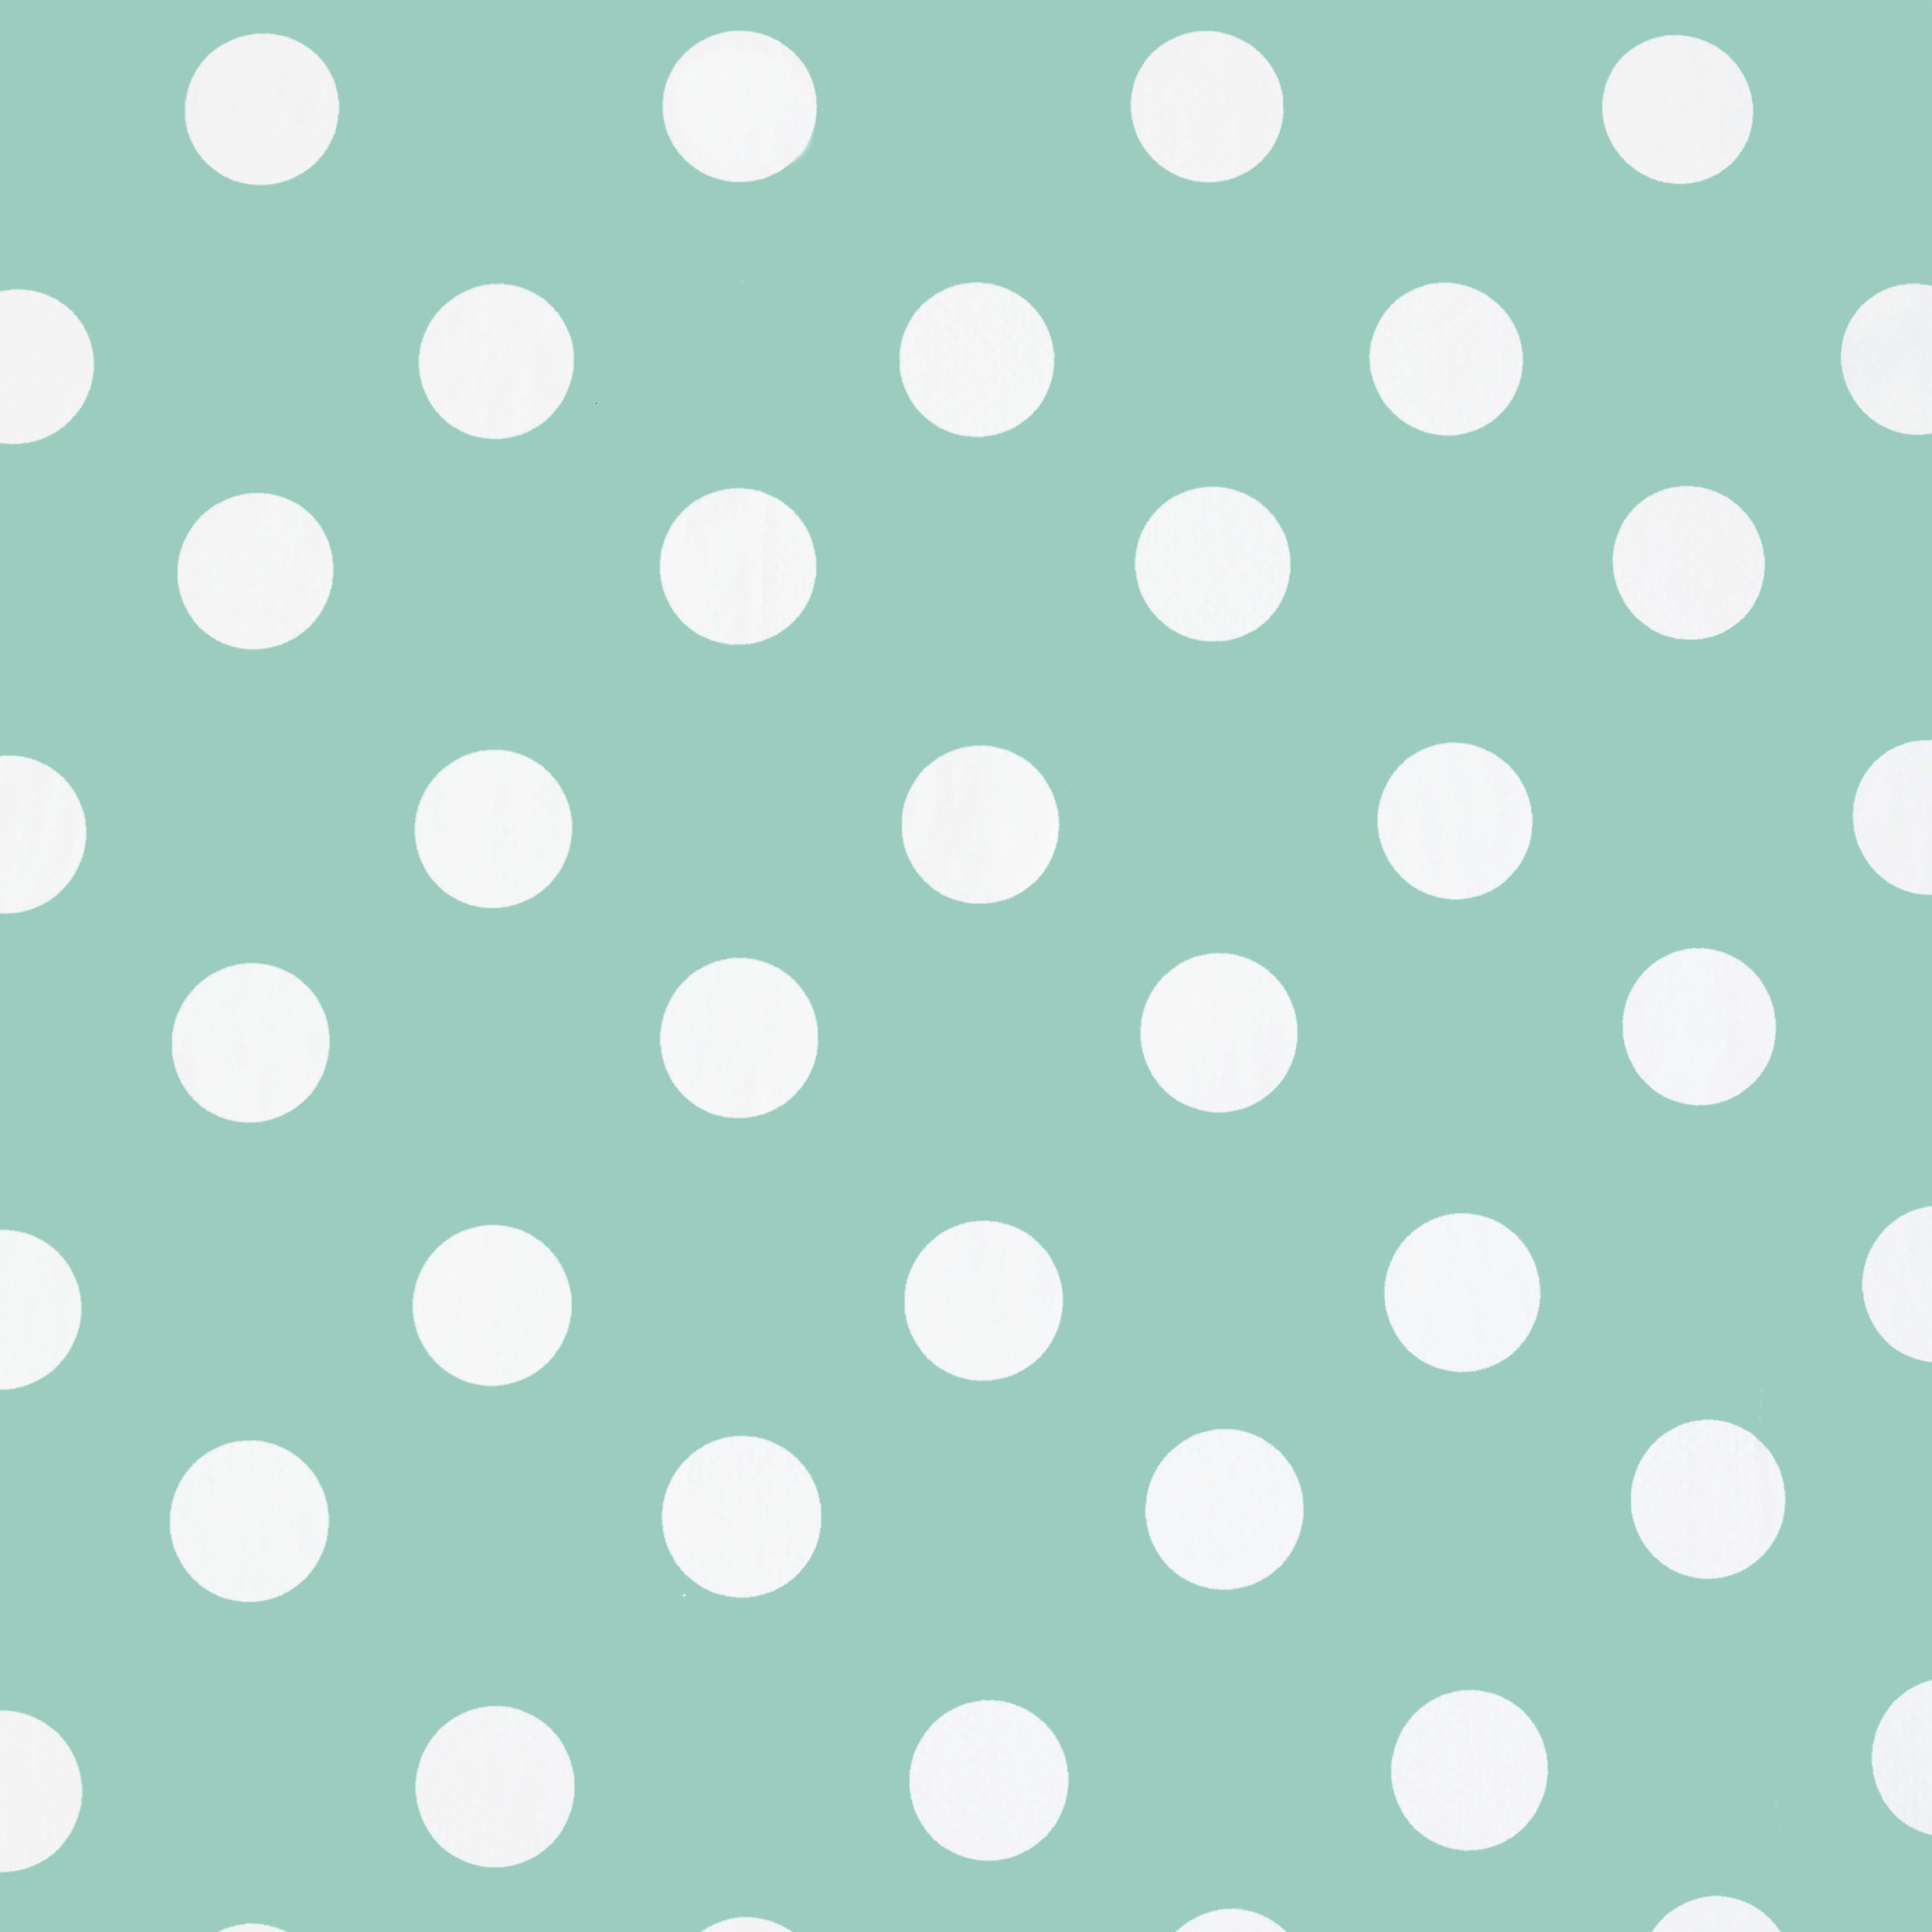 Polka Dot Free Download Clip Art Free Clip Art On Clipart Library